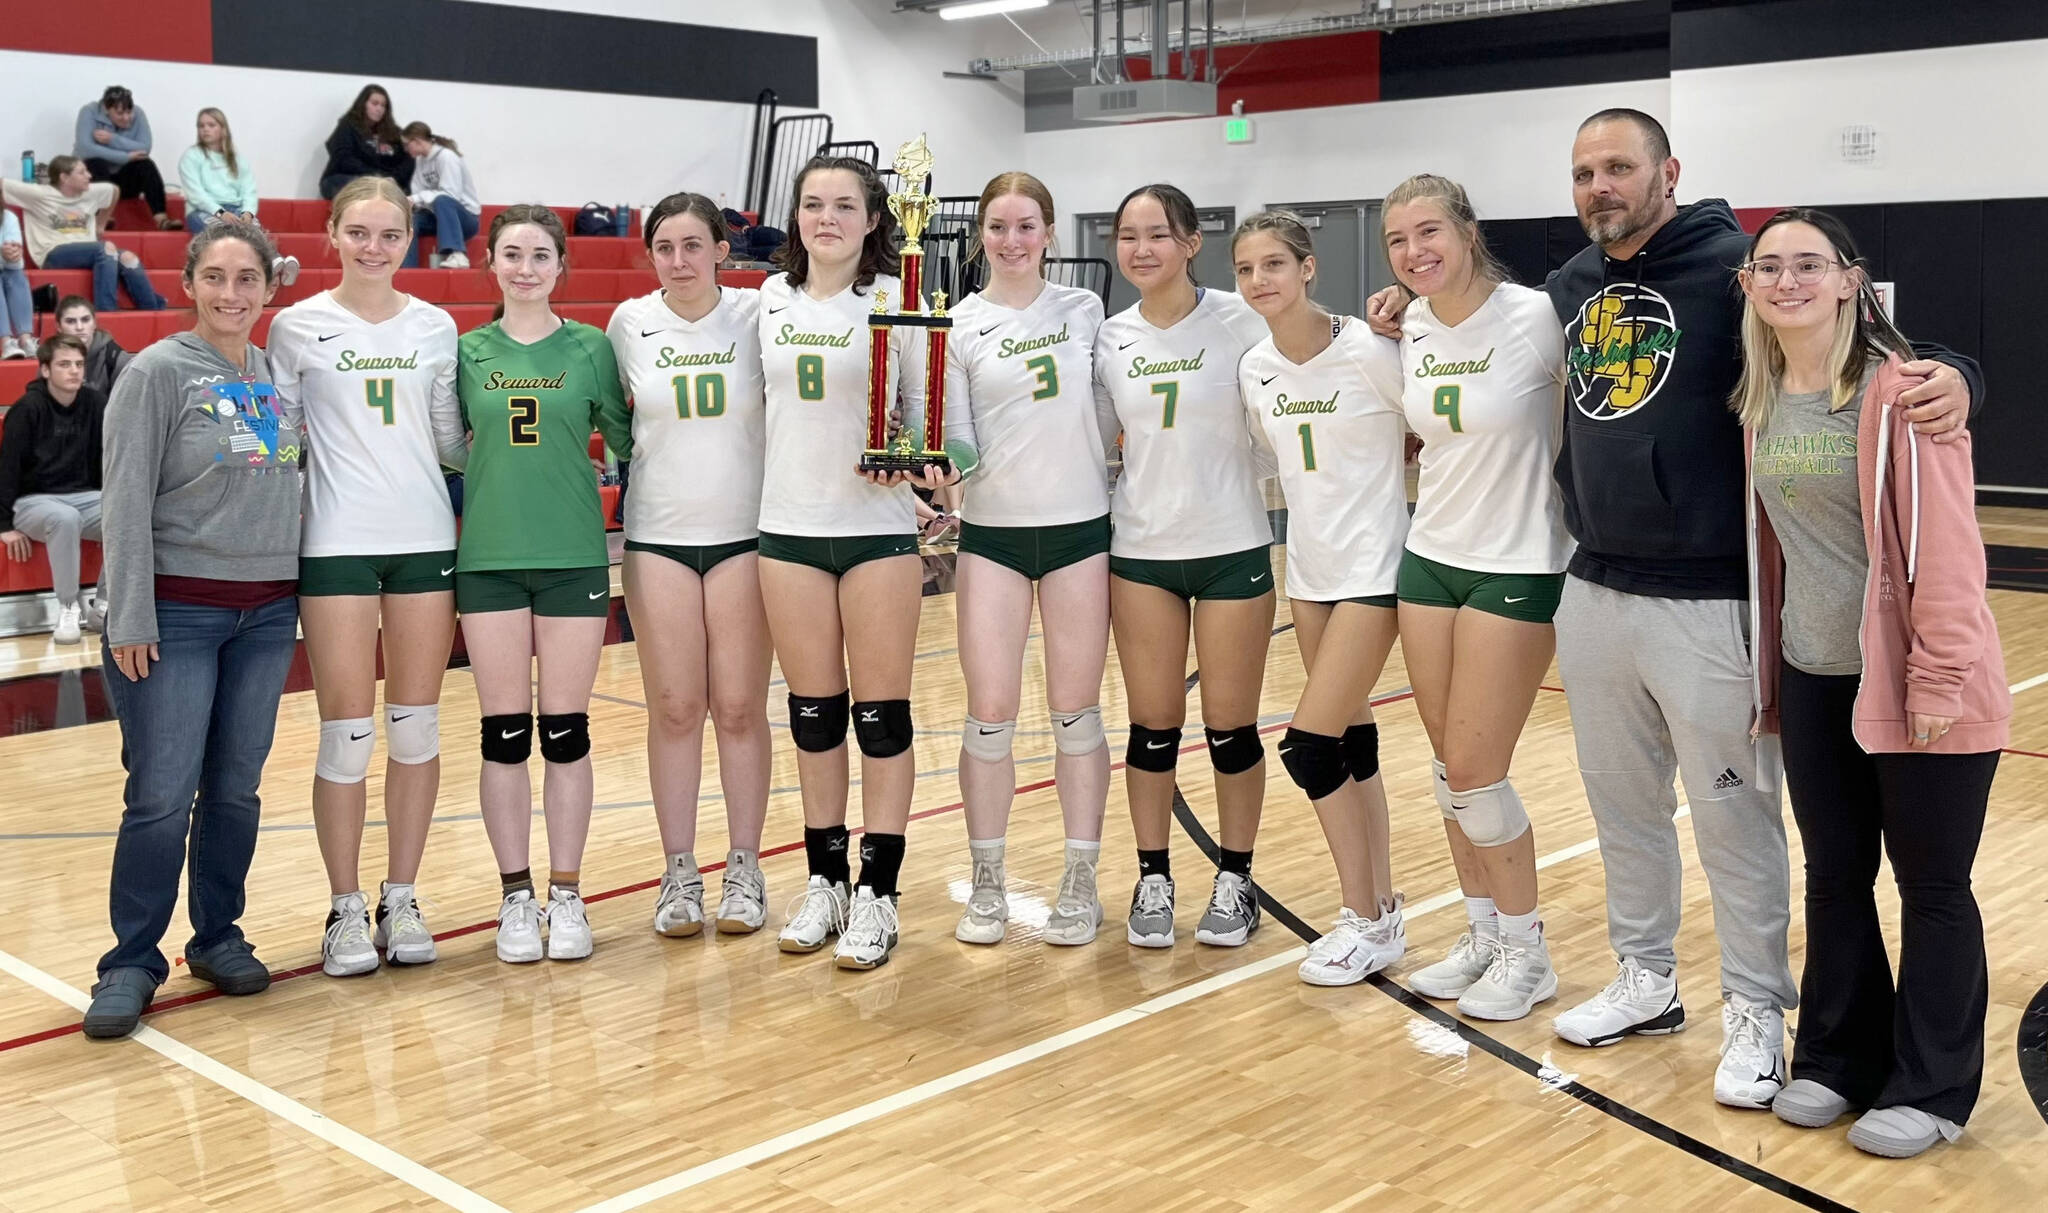 The Seward volleyball team after winning the North South Tournament on Saturday in Houston, Alaska. (Photo provided)